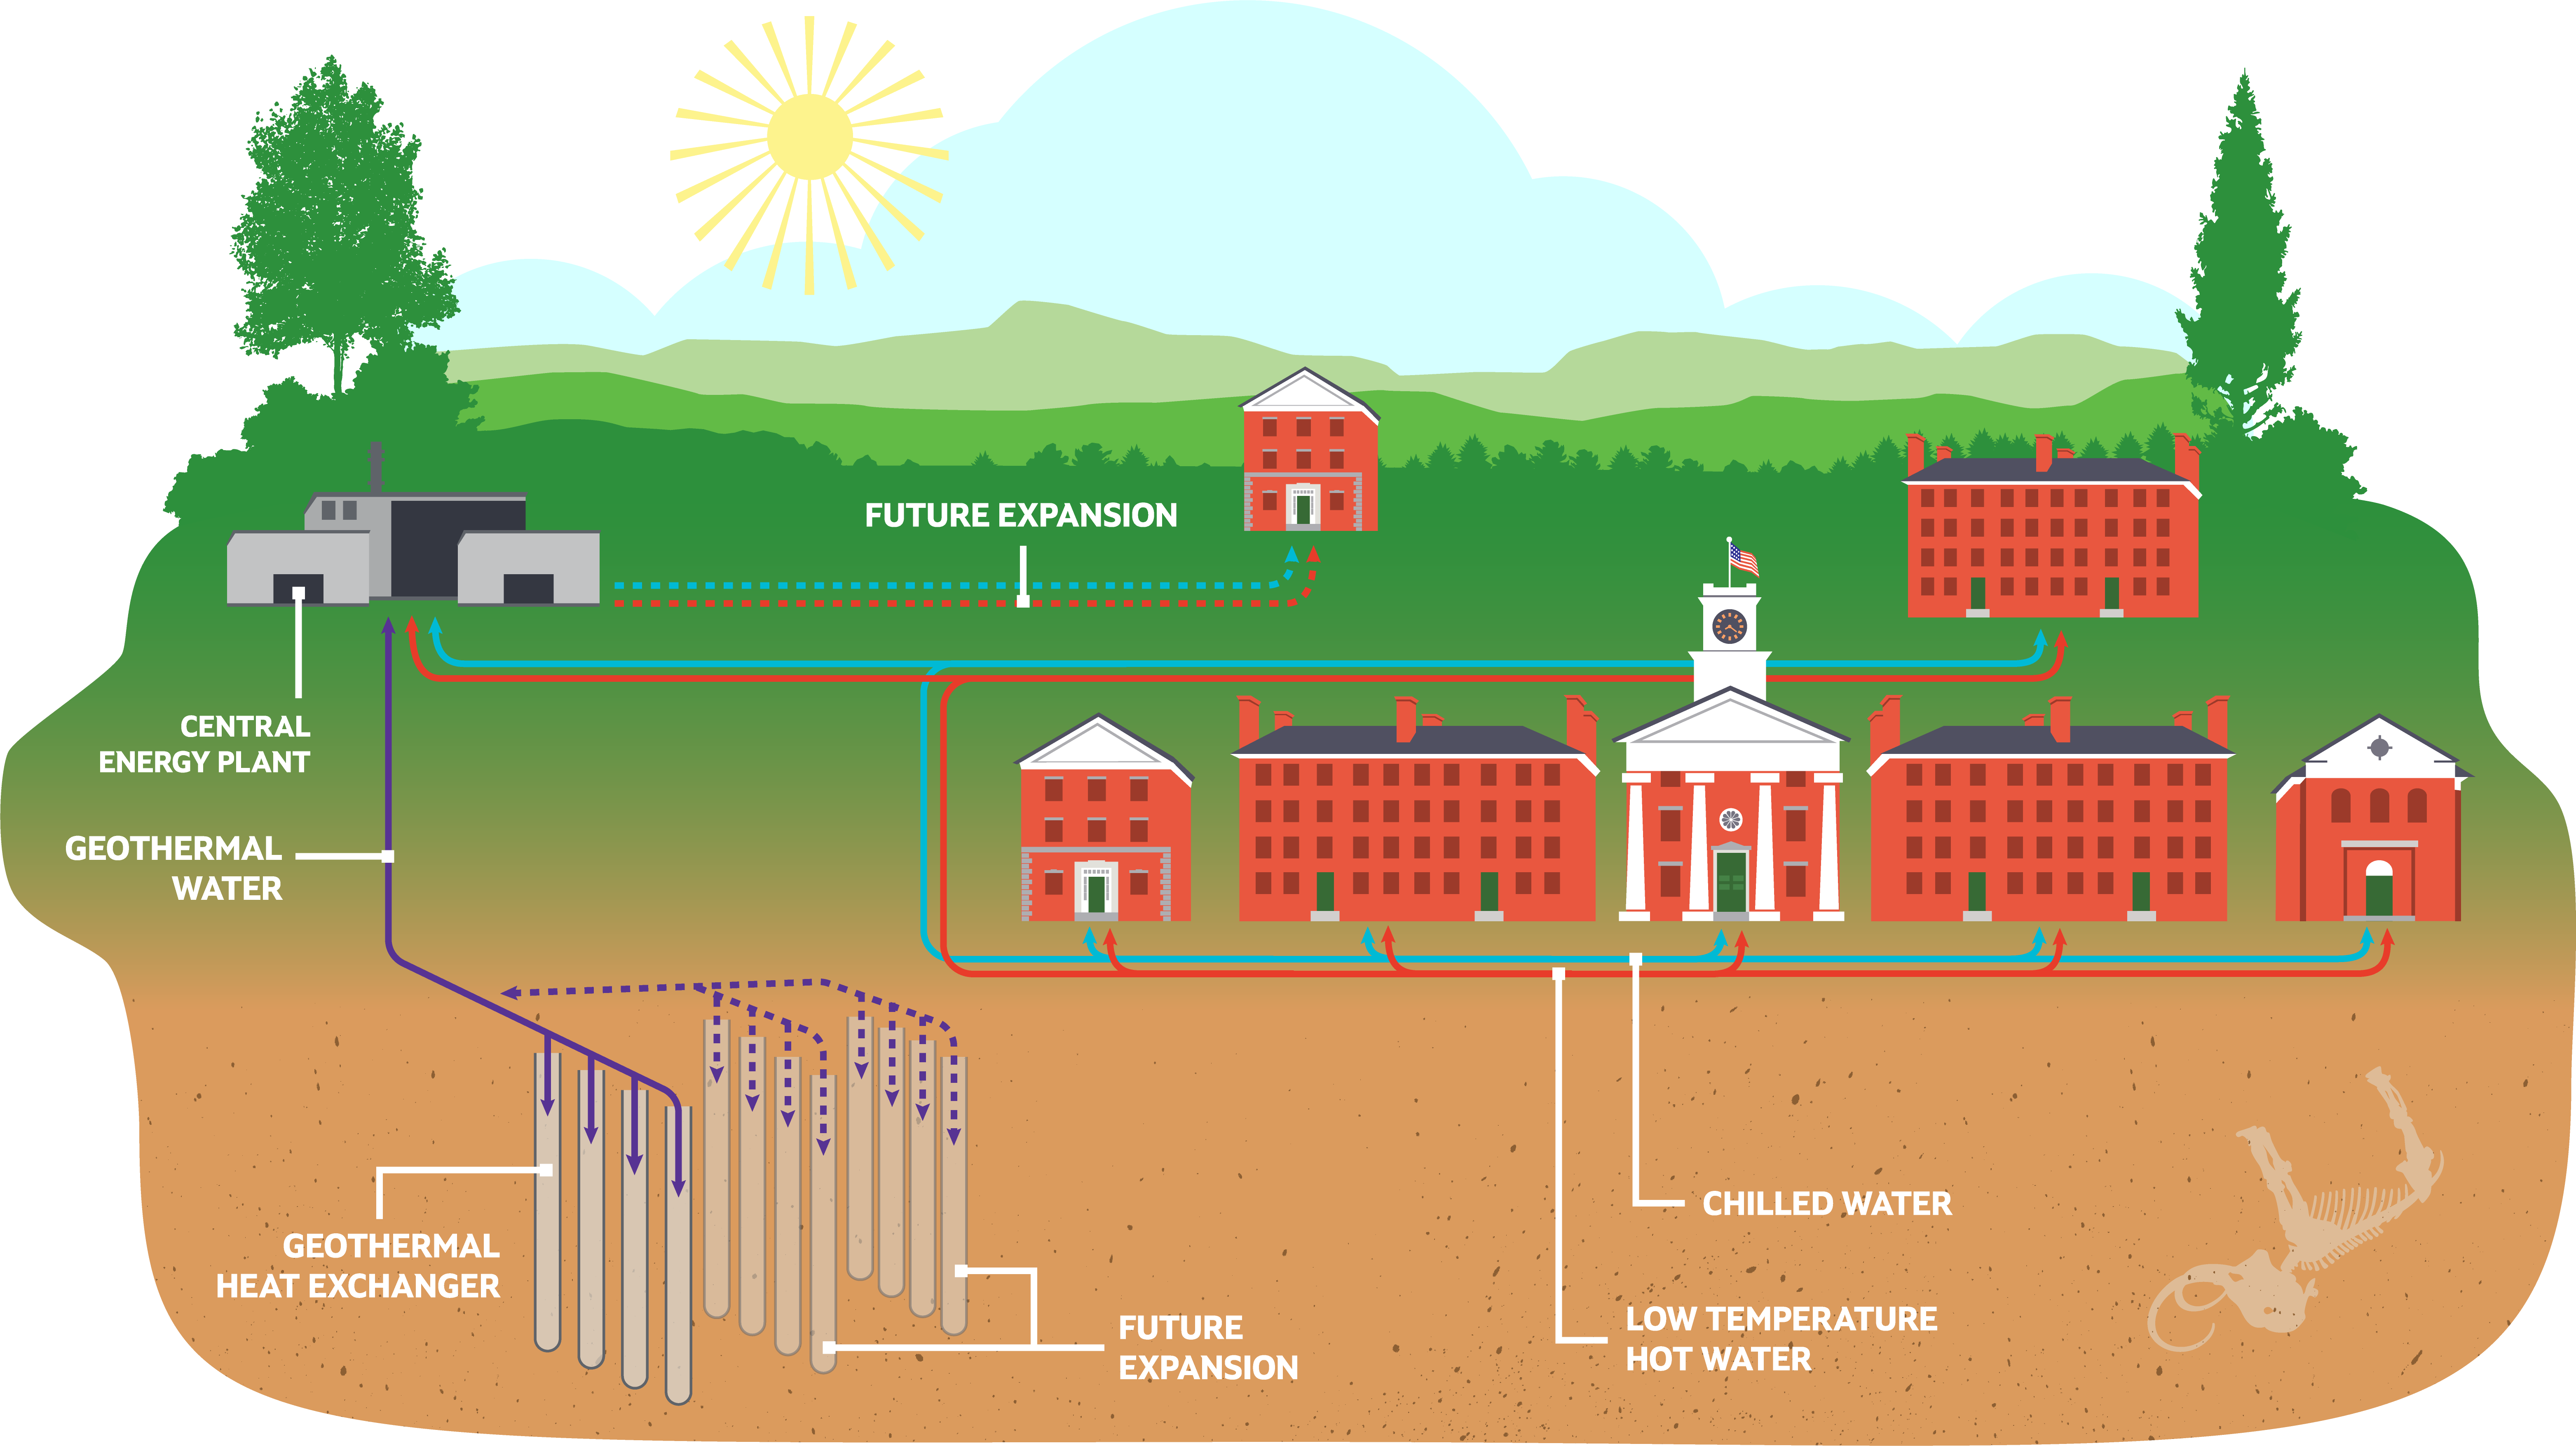 illustration of campus buildings connected by pipes, with the pipes going to and from underground wells